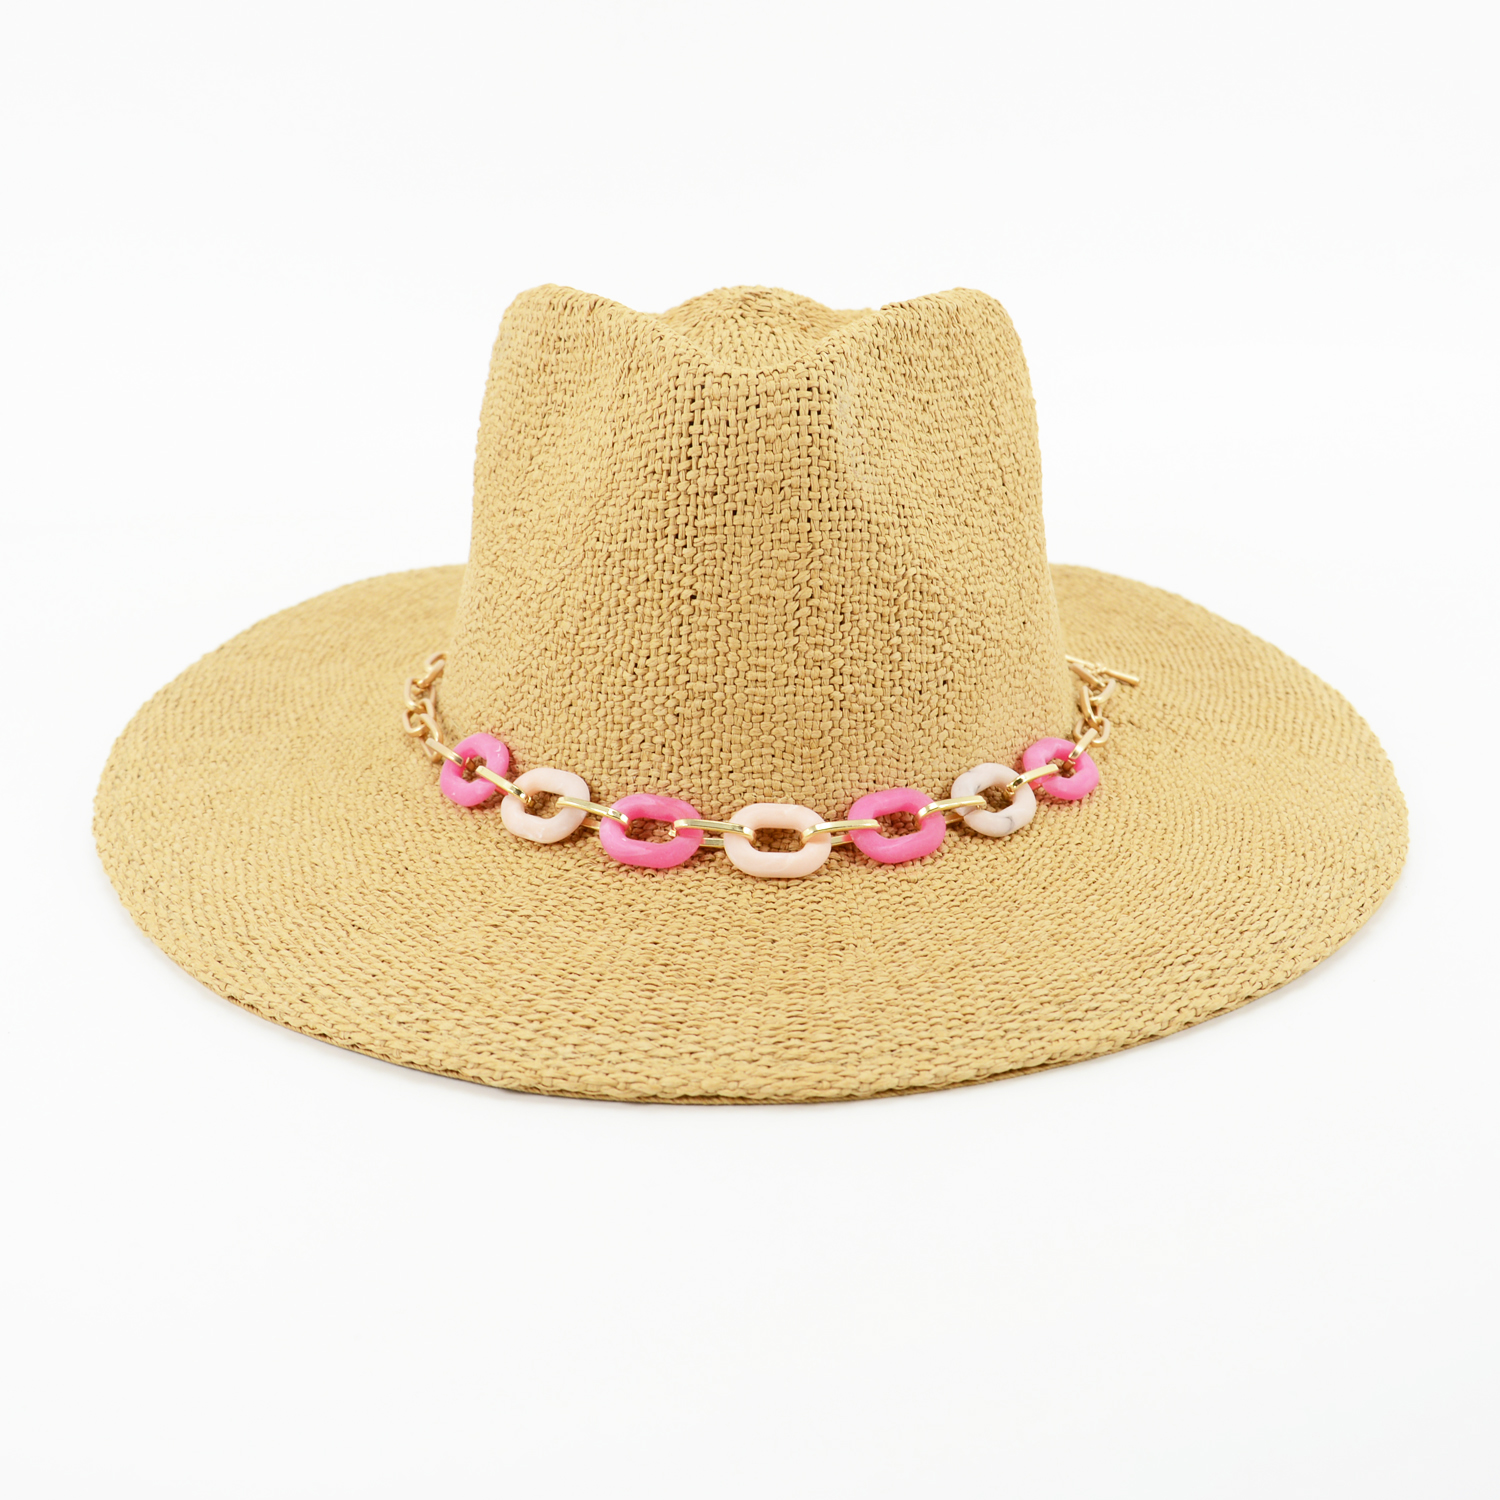 Weave Straw Hat with Li Chains Trimmings